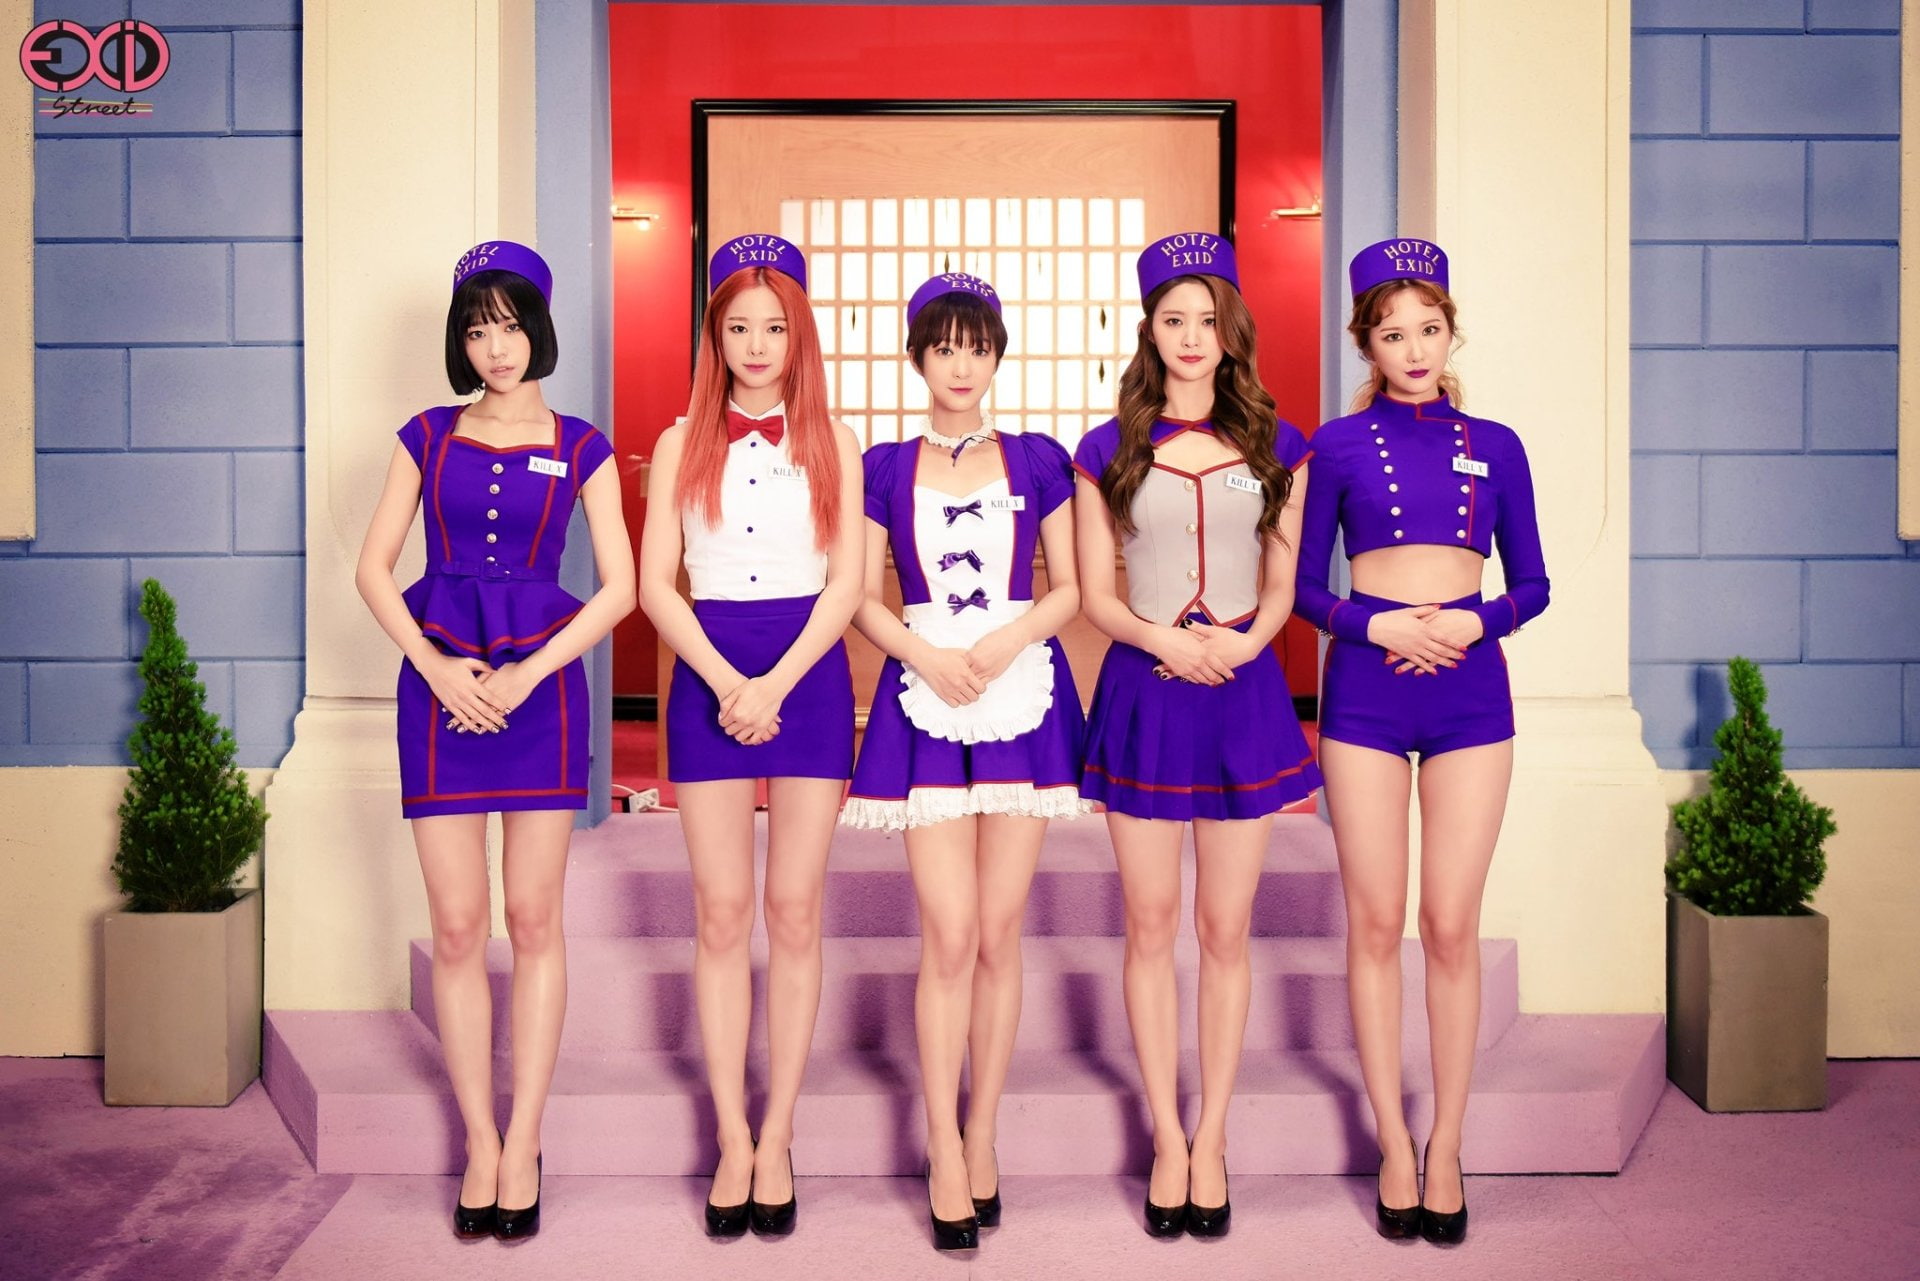 Band (Music), EXID, group of people, women, portrait, looking at camera